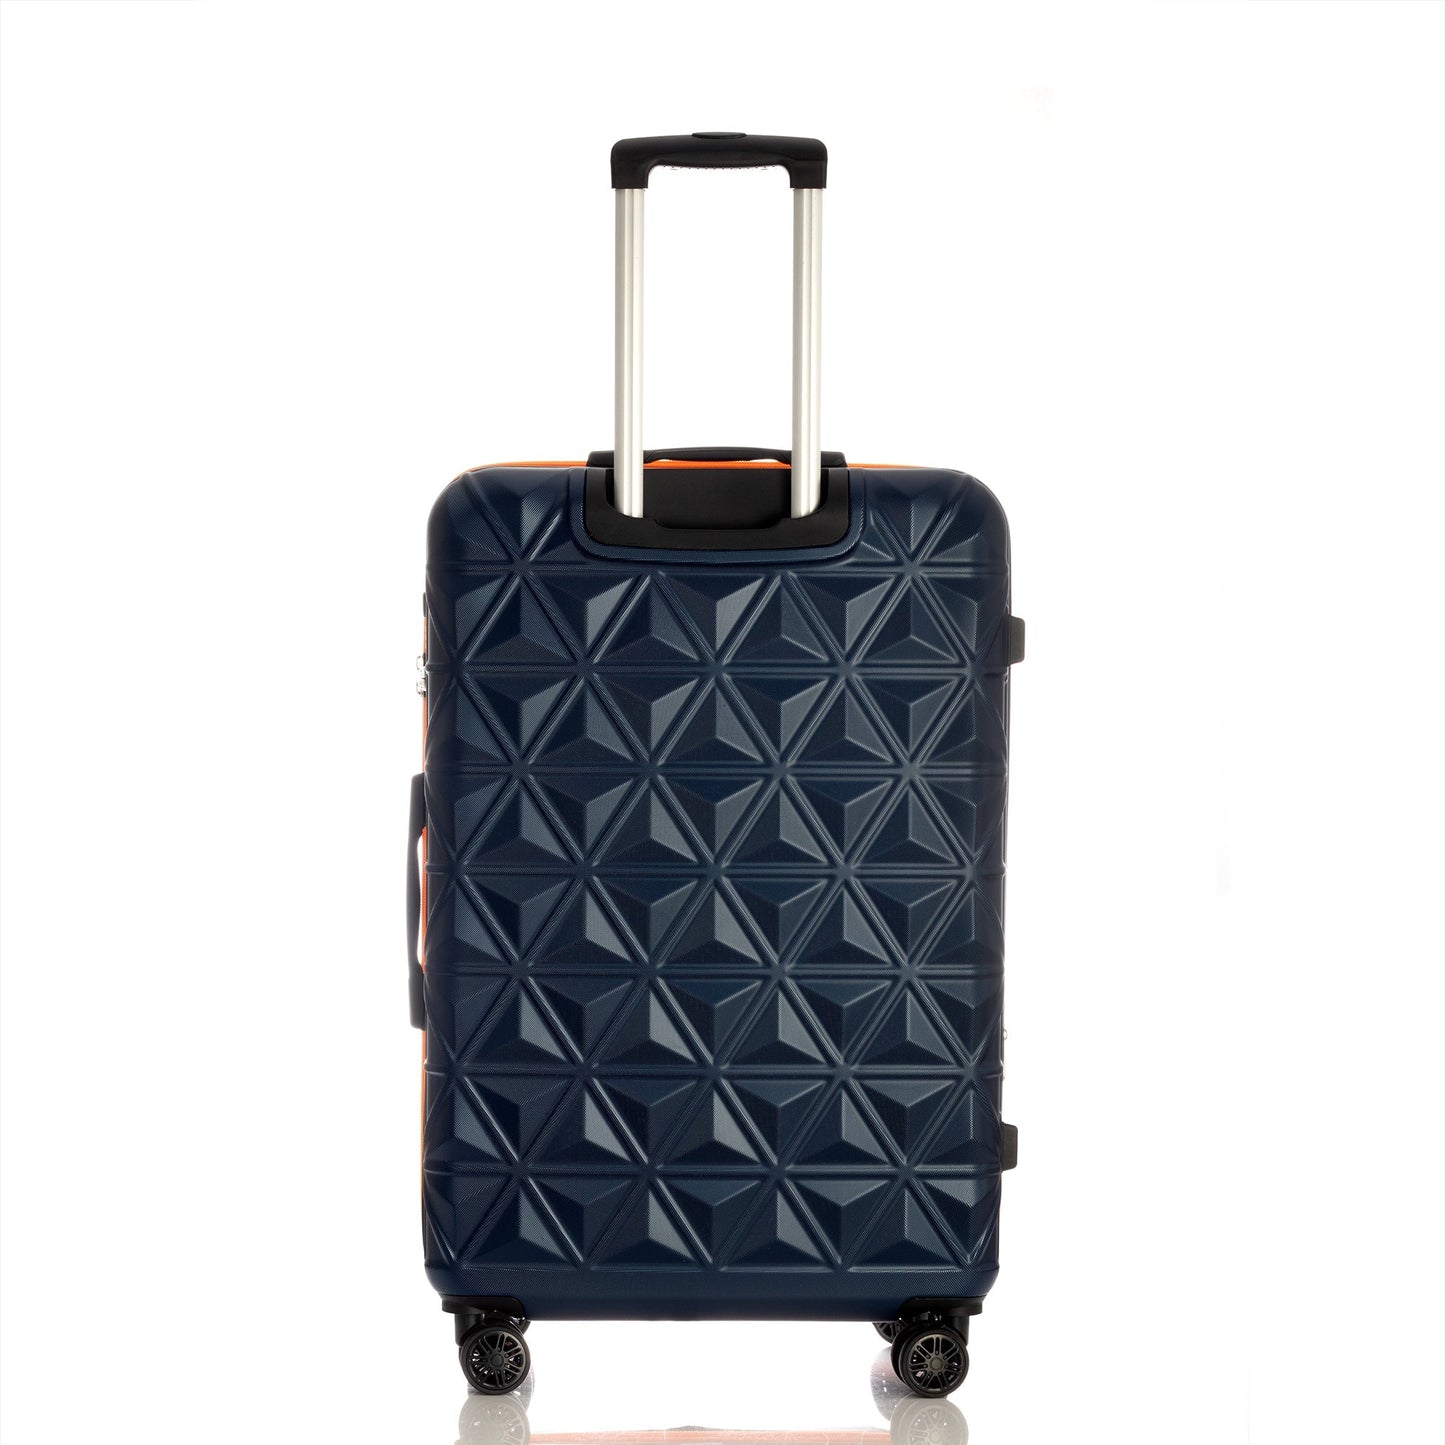 Cosmos Collection Navy Blue Luggage 3 Piece Set (21/25/29") Suitcase Lock Spinner Hardshell